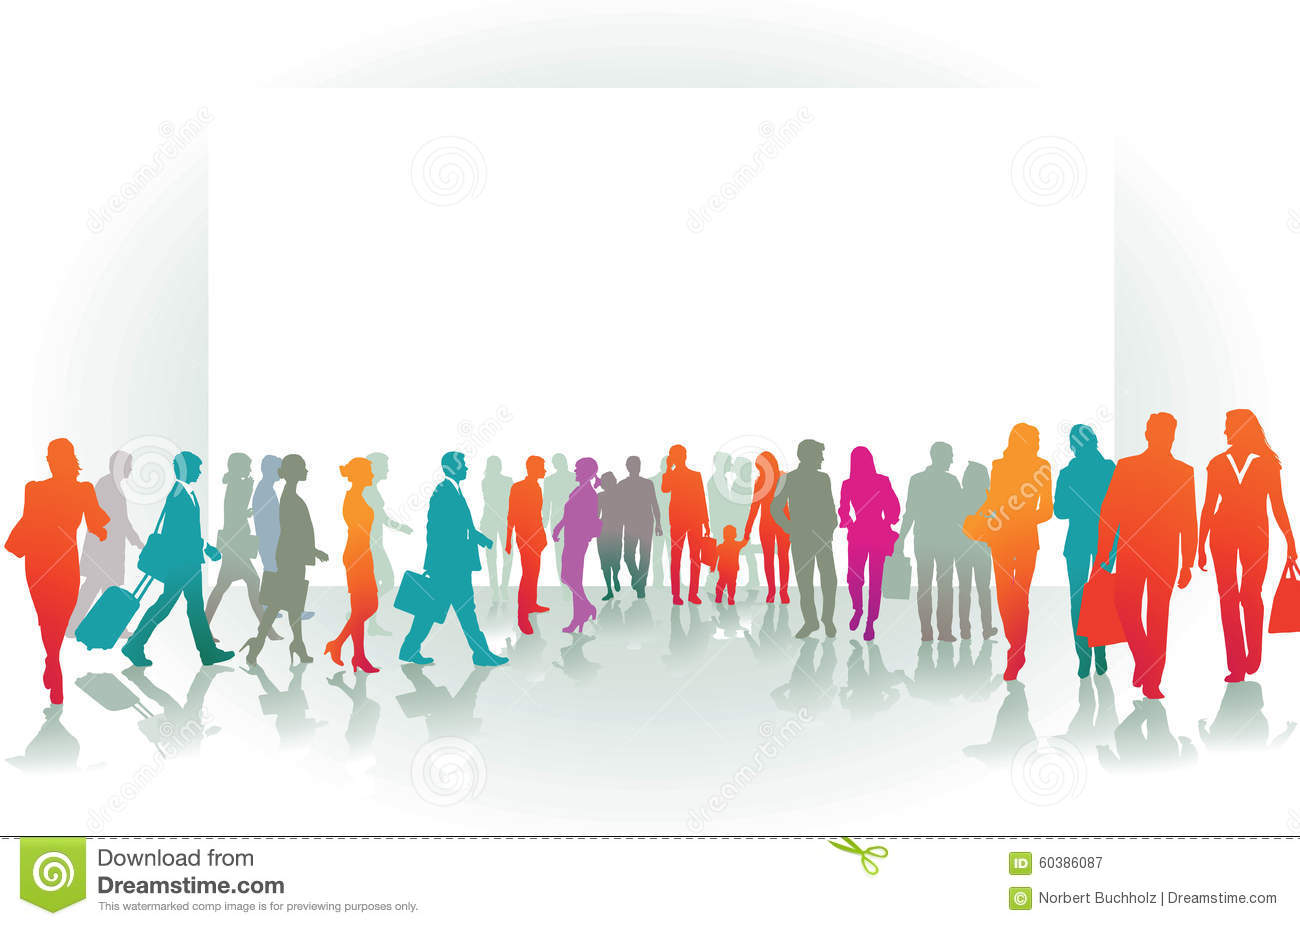 Colorful Silhouettes of People Walking